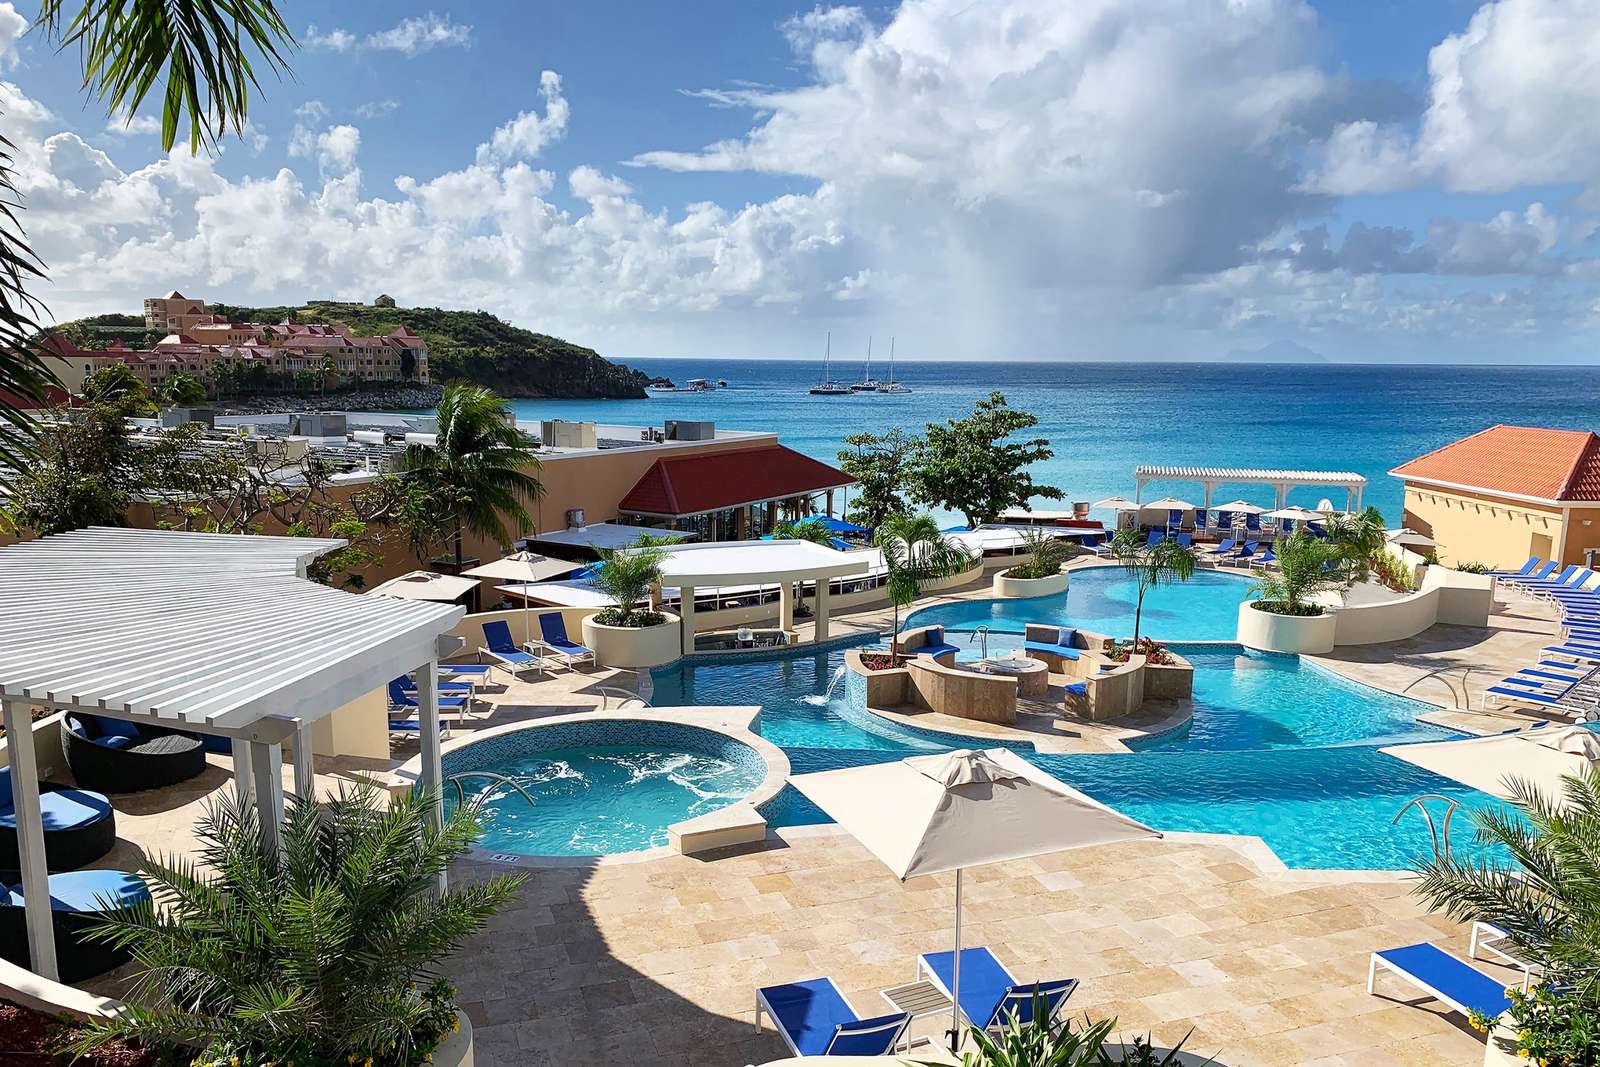 Resort With Pools puzzle online from photo